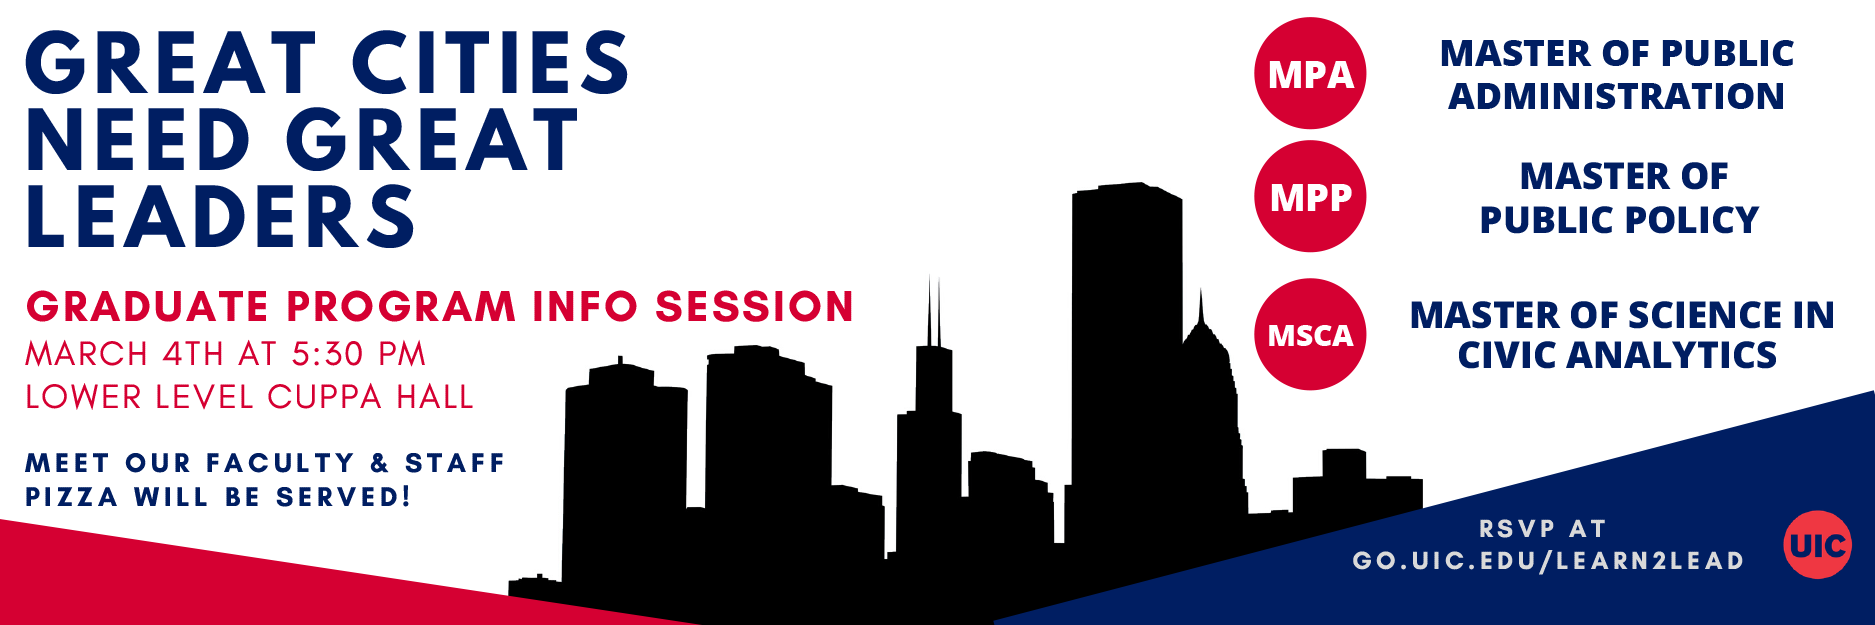 Great Cities Need Great Leaders - Graduate program info session, march 4th at 5:30 PM lower level CUPPA Hall. Meet our faculty and staff. Pizza will be served! Master of Public Administration, Master of Public Policy, Master of Science in civic analytics - Rsvp at go.uic.edu/learn2lead